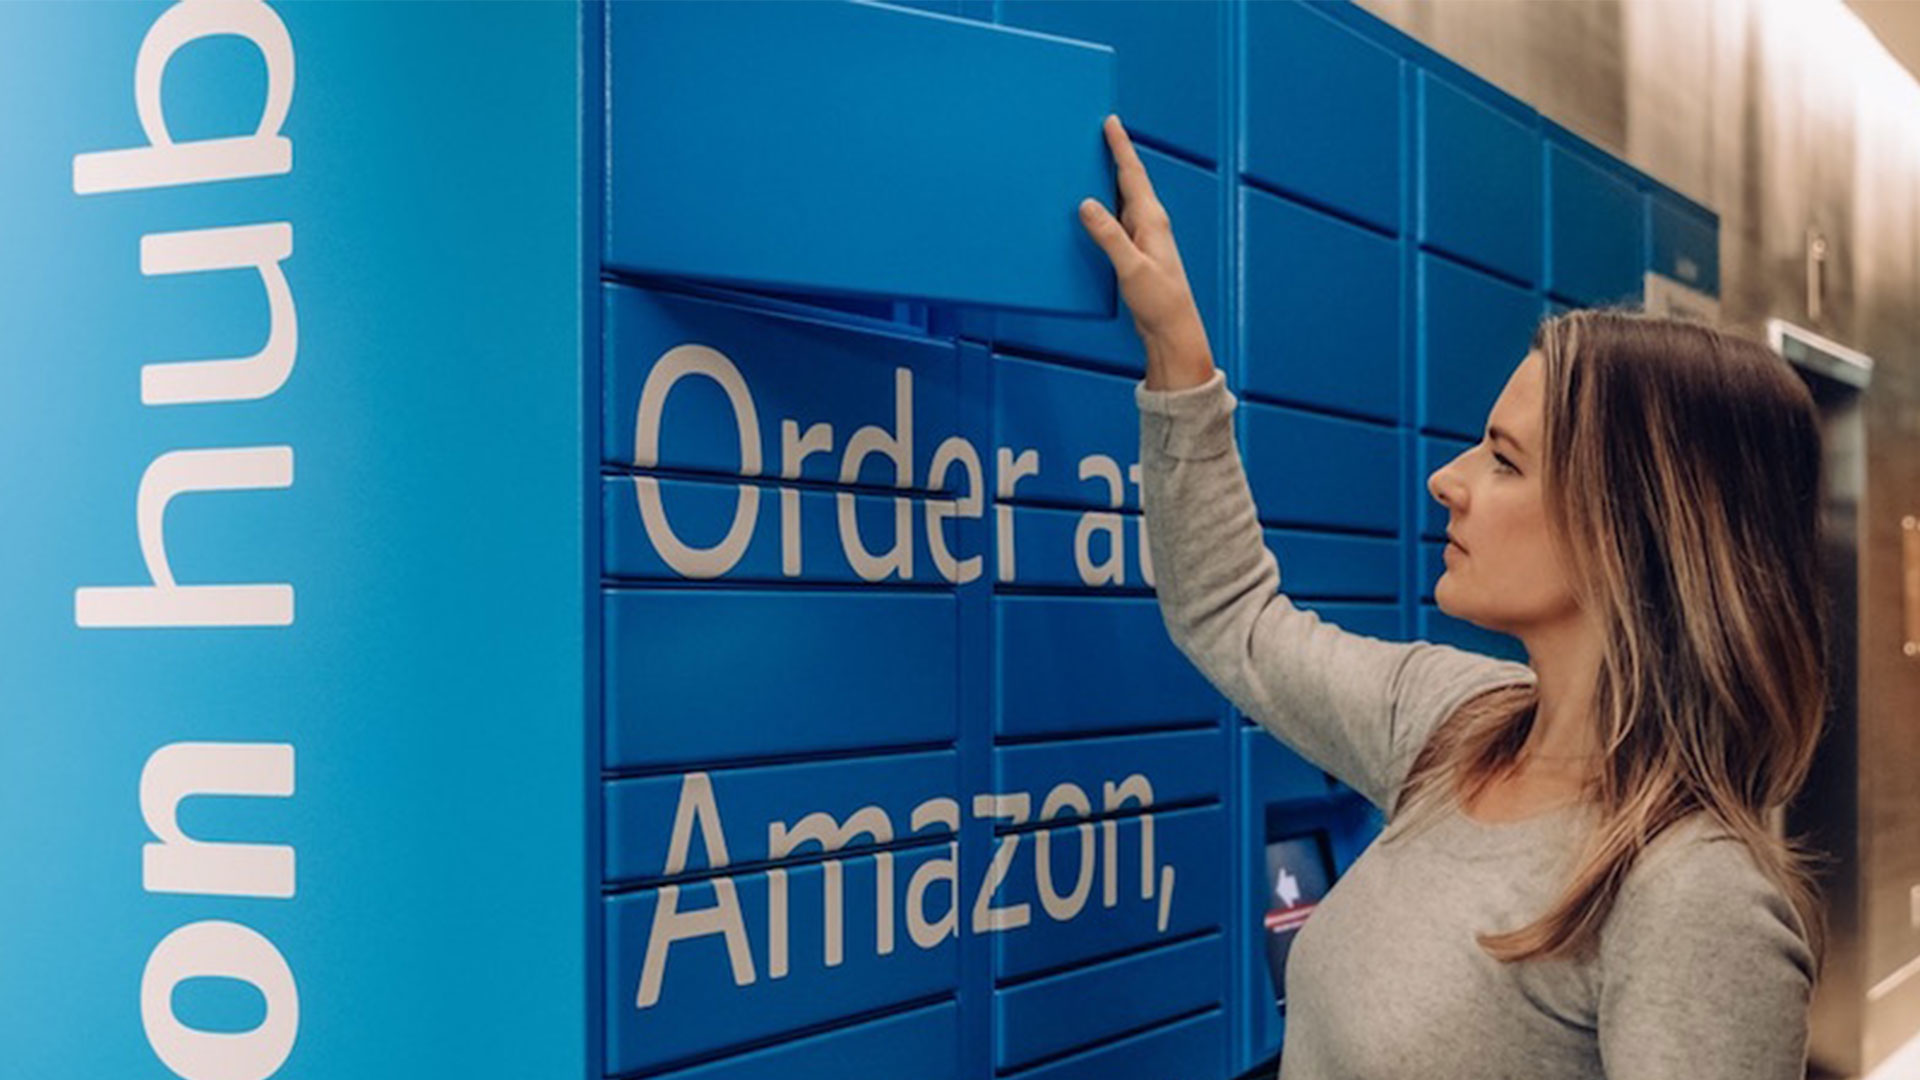 Amazon Hub Locker Guide: Where To Find One and How To Use Them